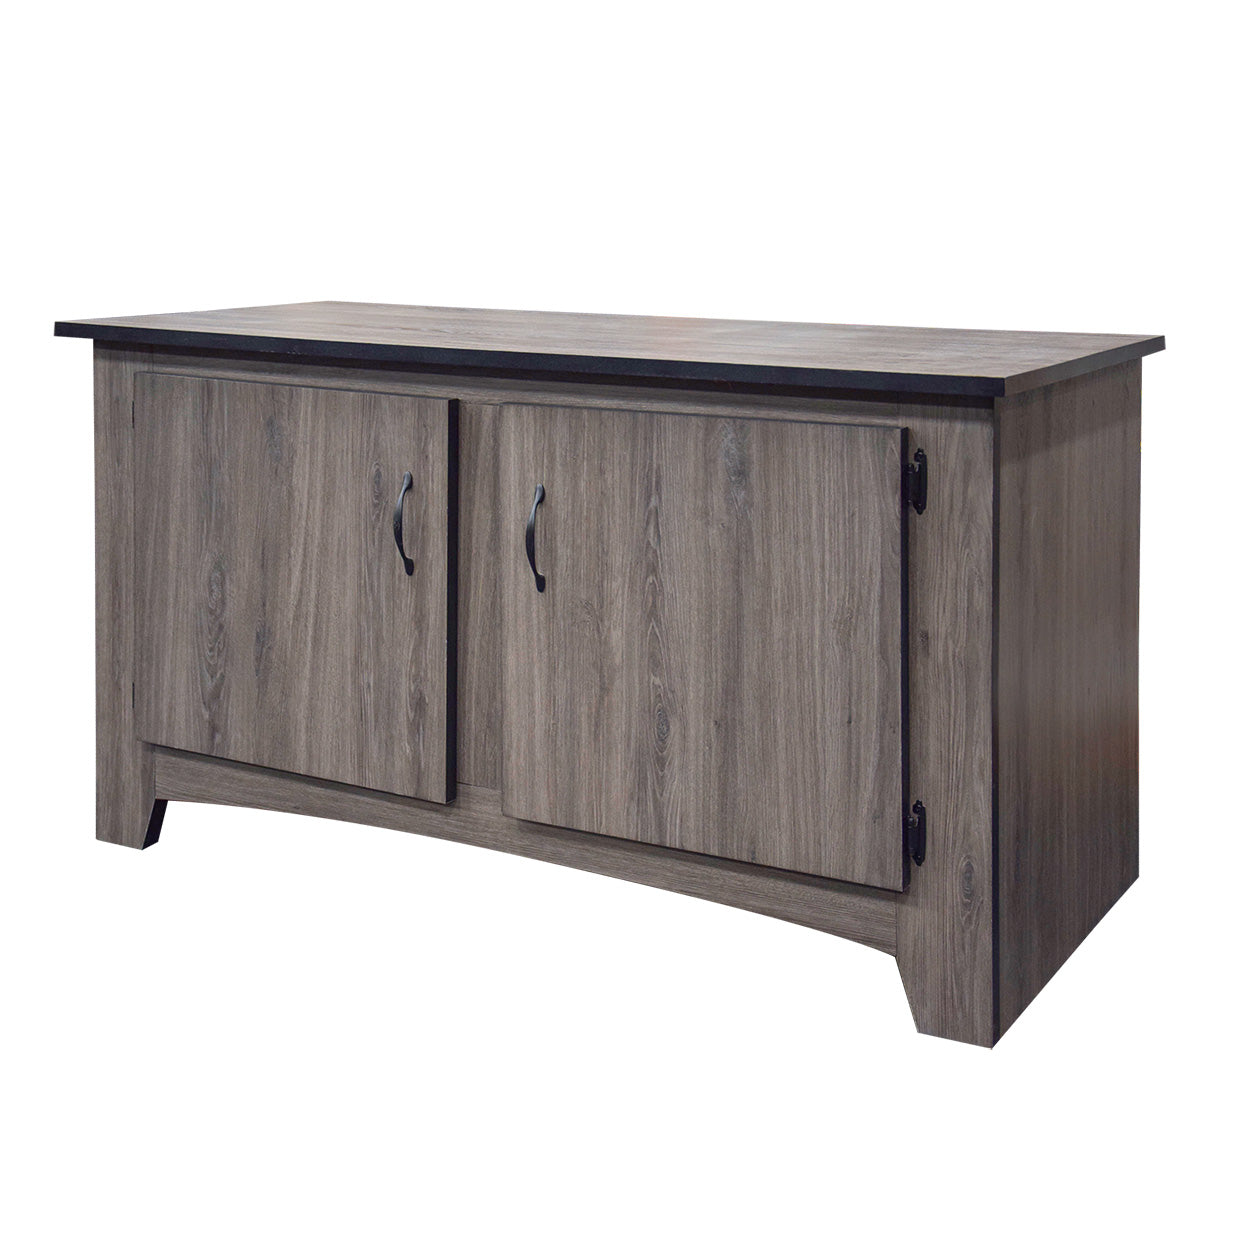 Seapora Rustic Grey Stand (Special Order Product)